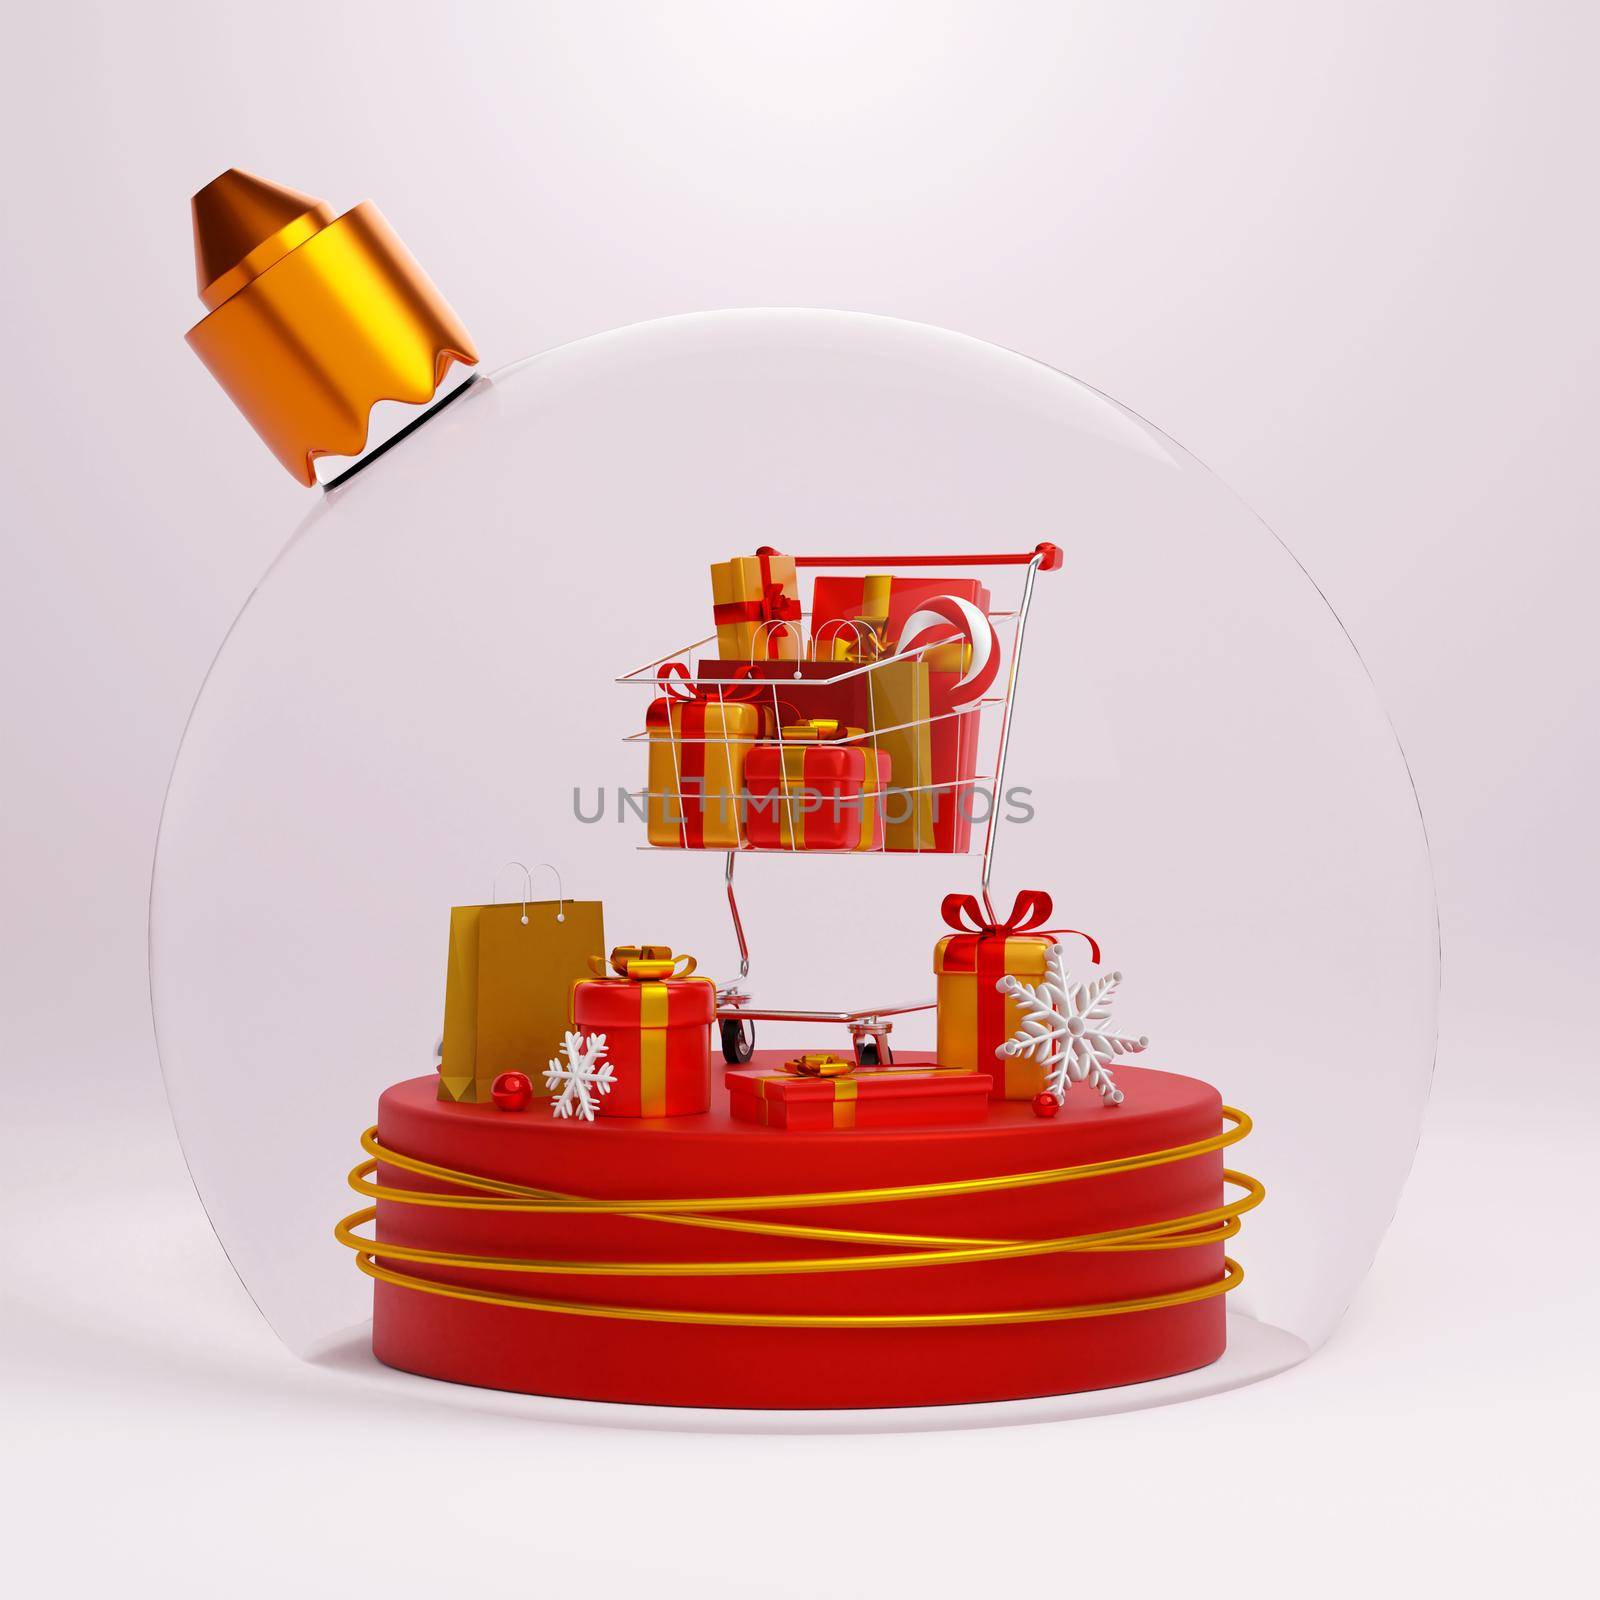 Shopping cart fulled of gift and shopping bag on geometric podium in Christmas ball, 3d illustration by nutzchotwarut